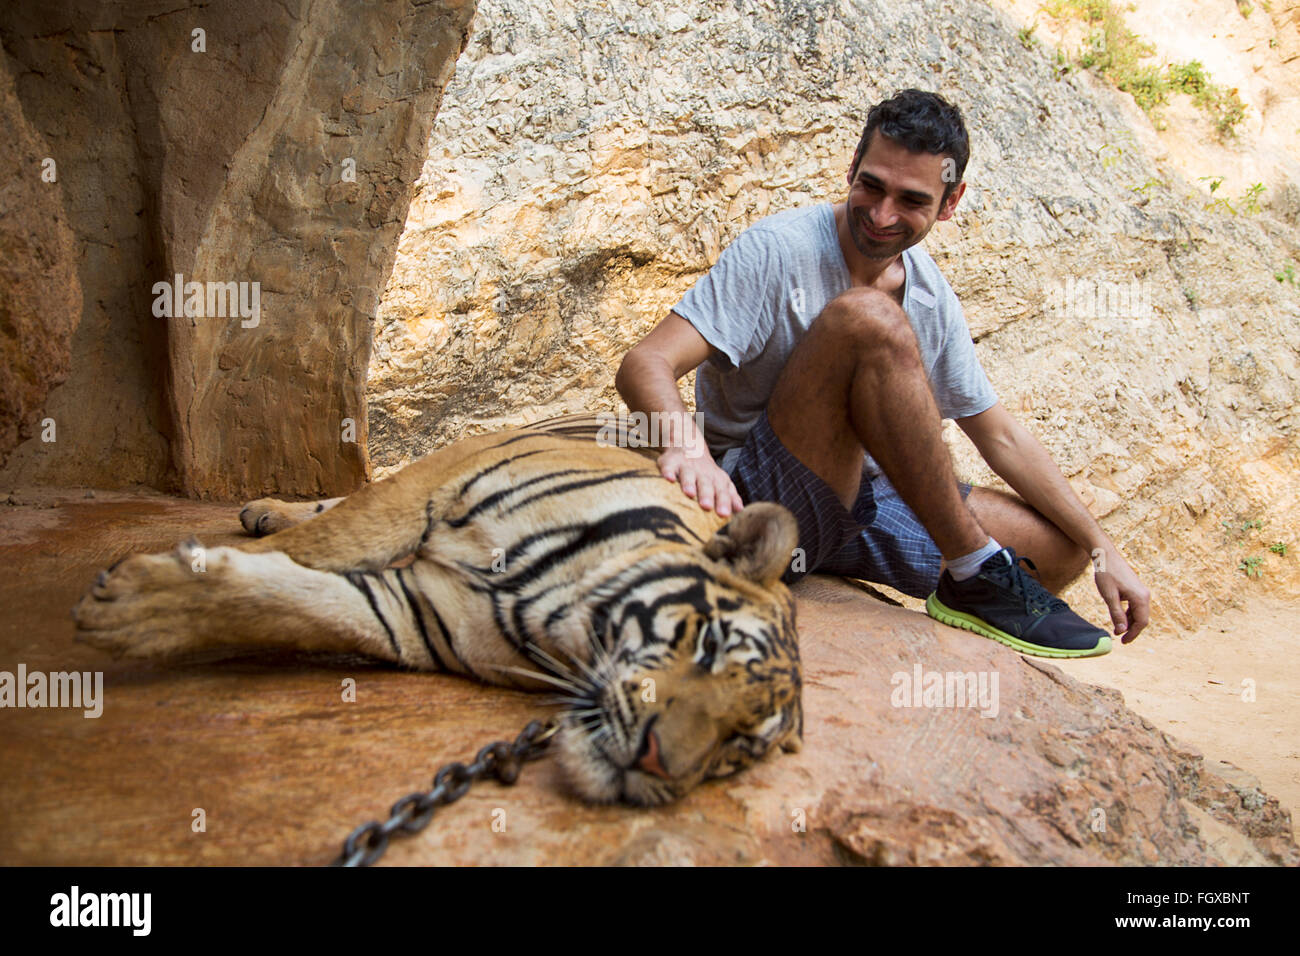 Man in Tiger temple in Thailand Stock Photo